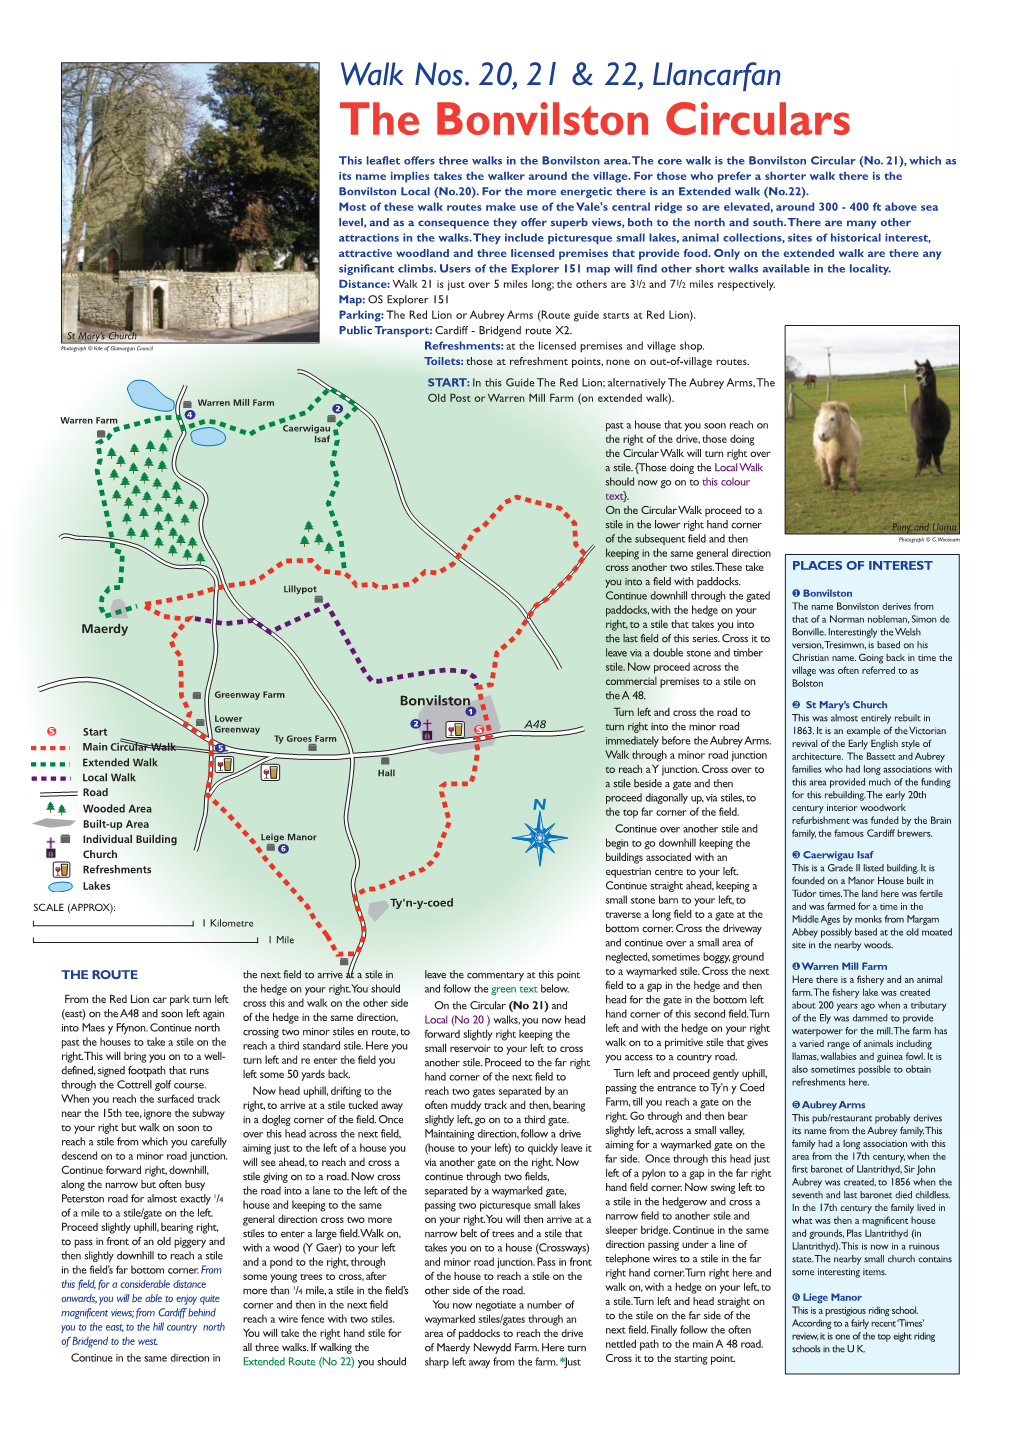 The Bonvilston Circulars This Leaflet Offers Three Walks in the Bonvilston Area.The Core Walk Is the Bonvilston Circular (No